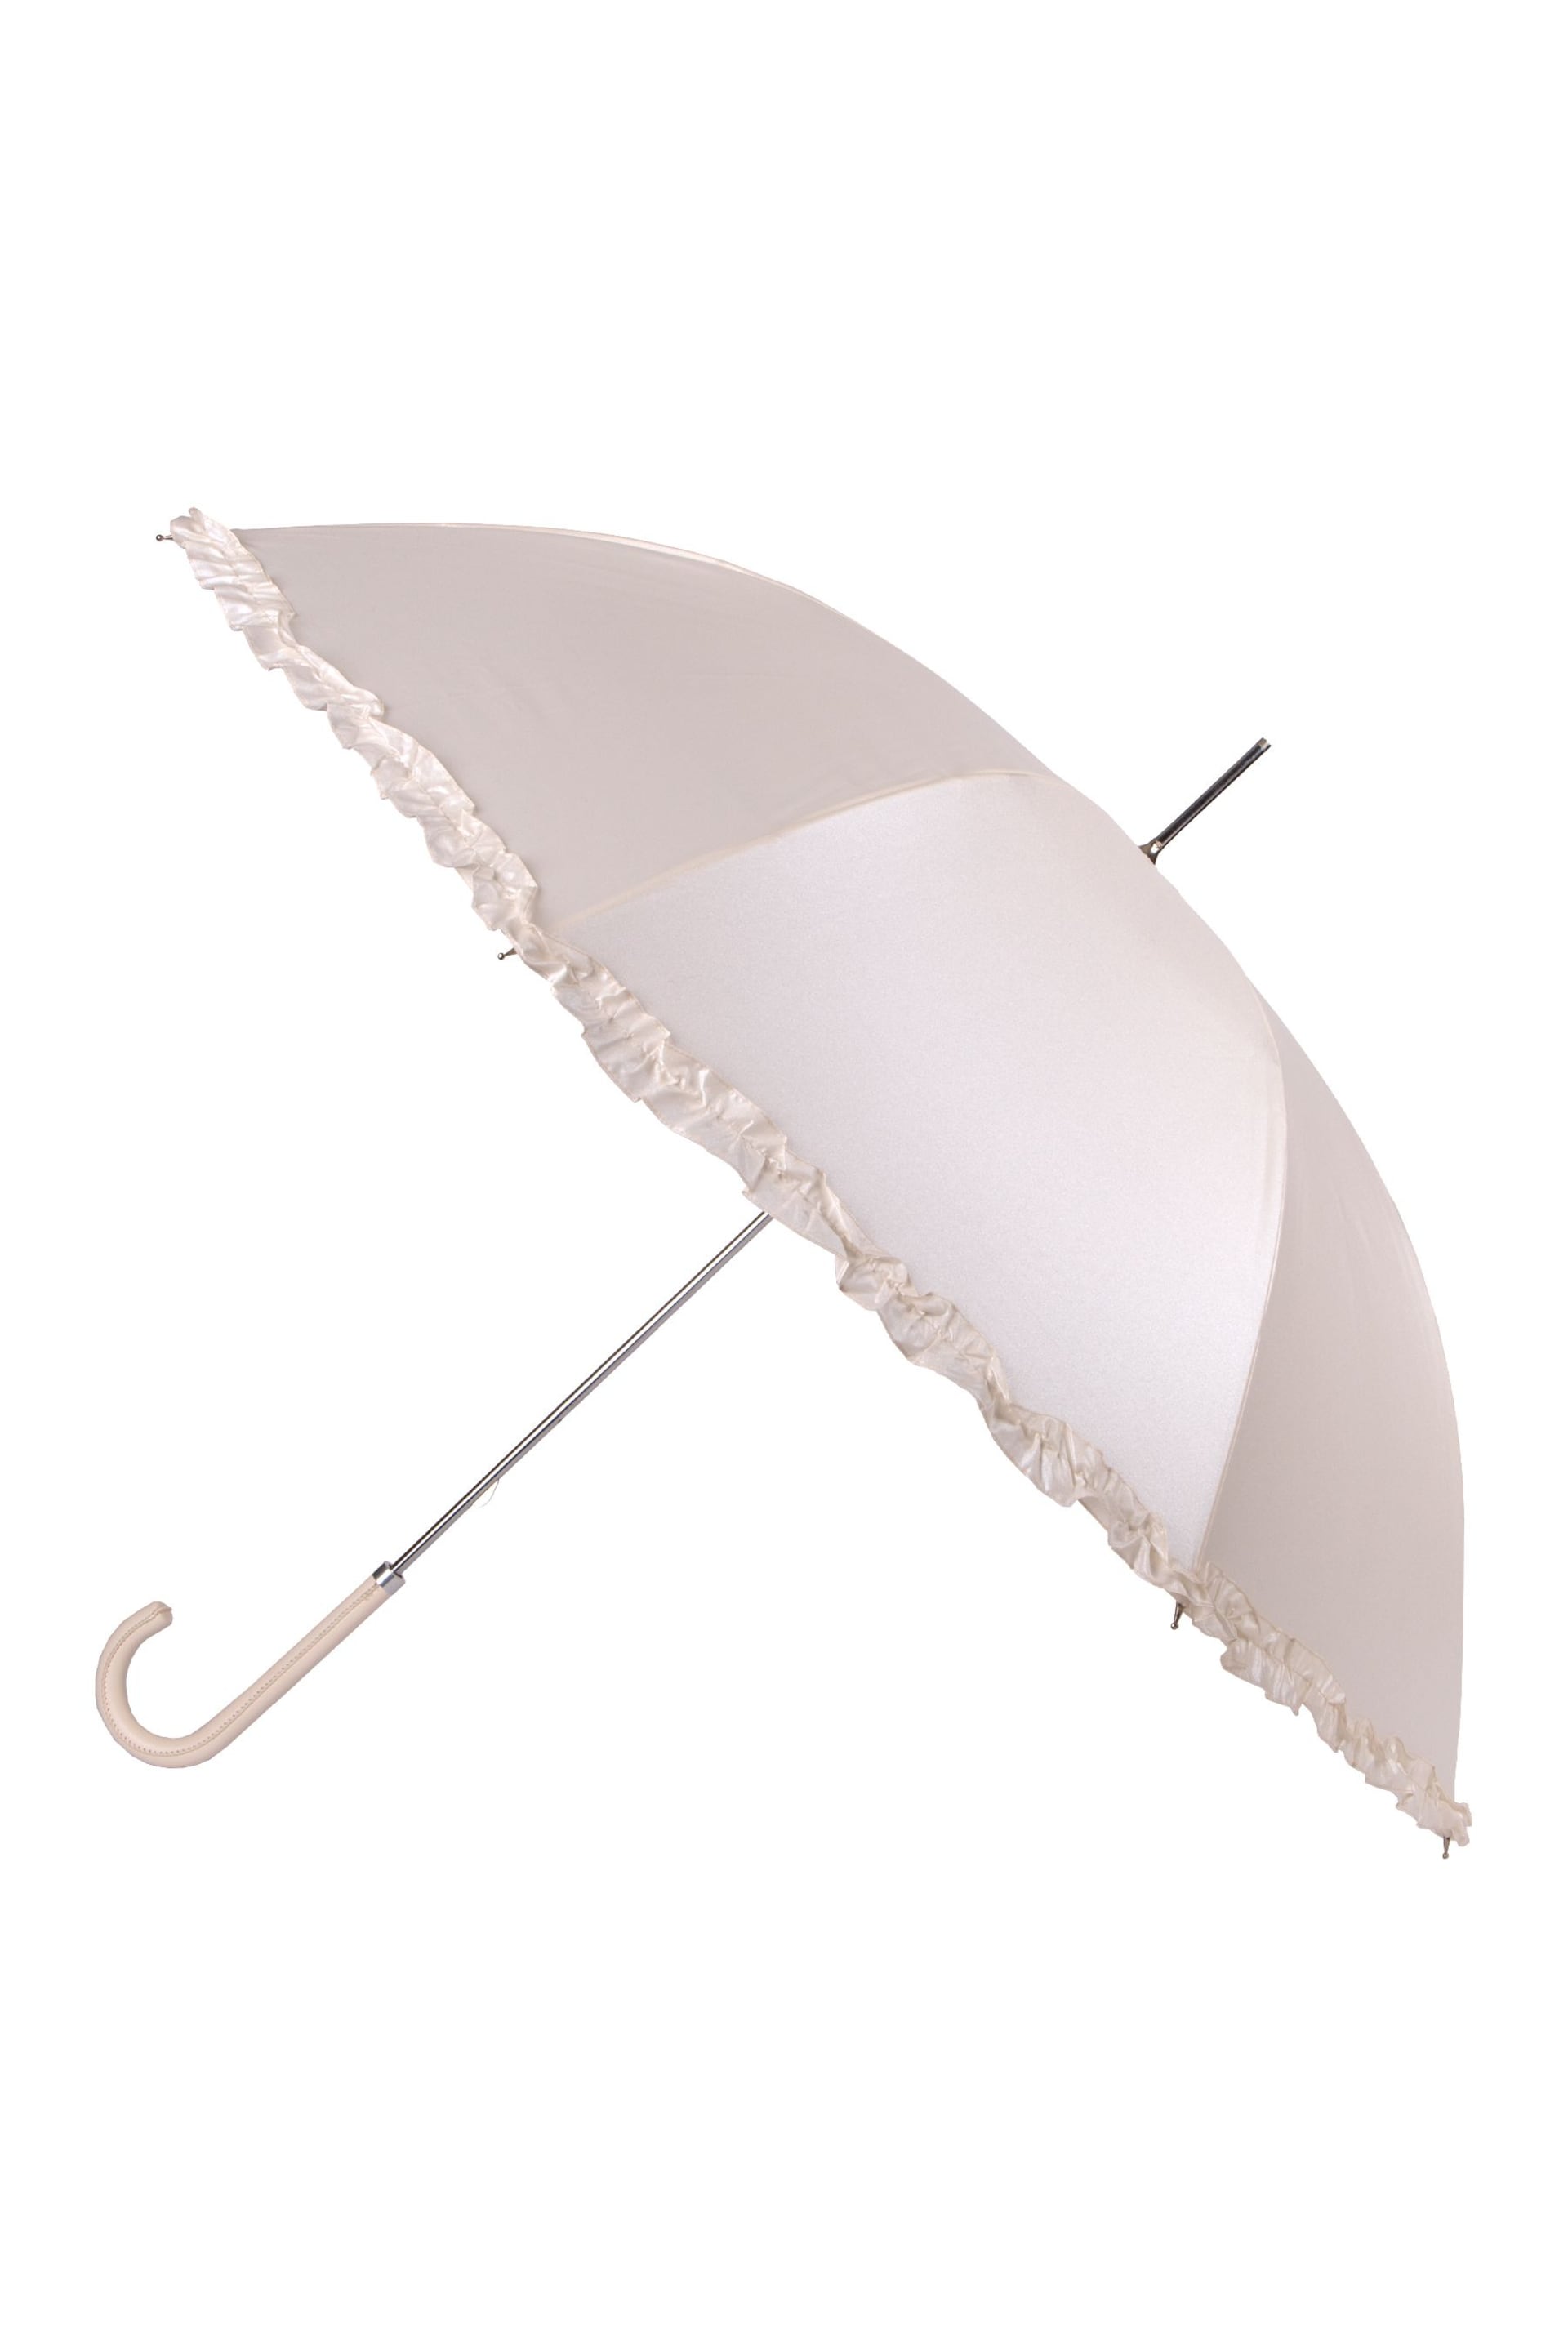 Totes White Pearlised Wedding Walker Umbrella With Frill - Image 3 of 4